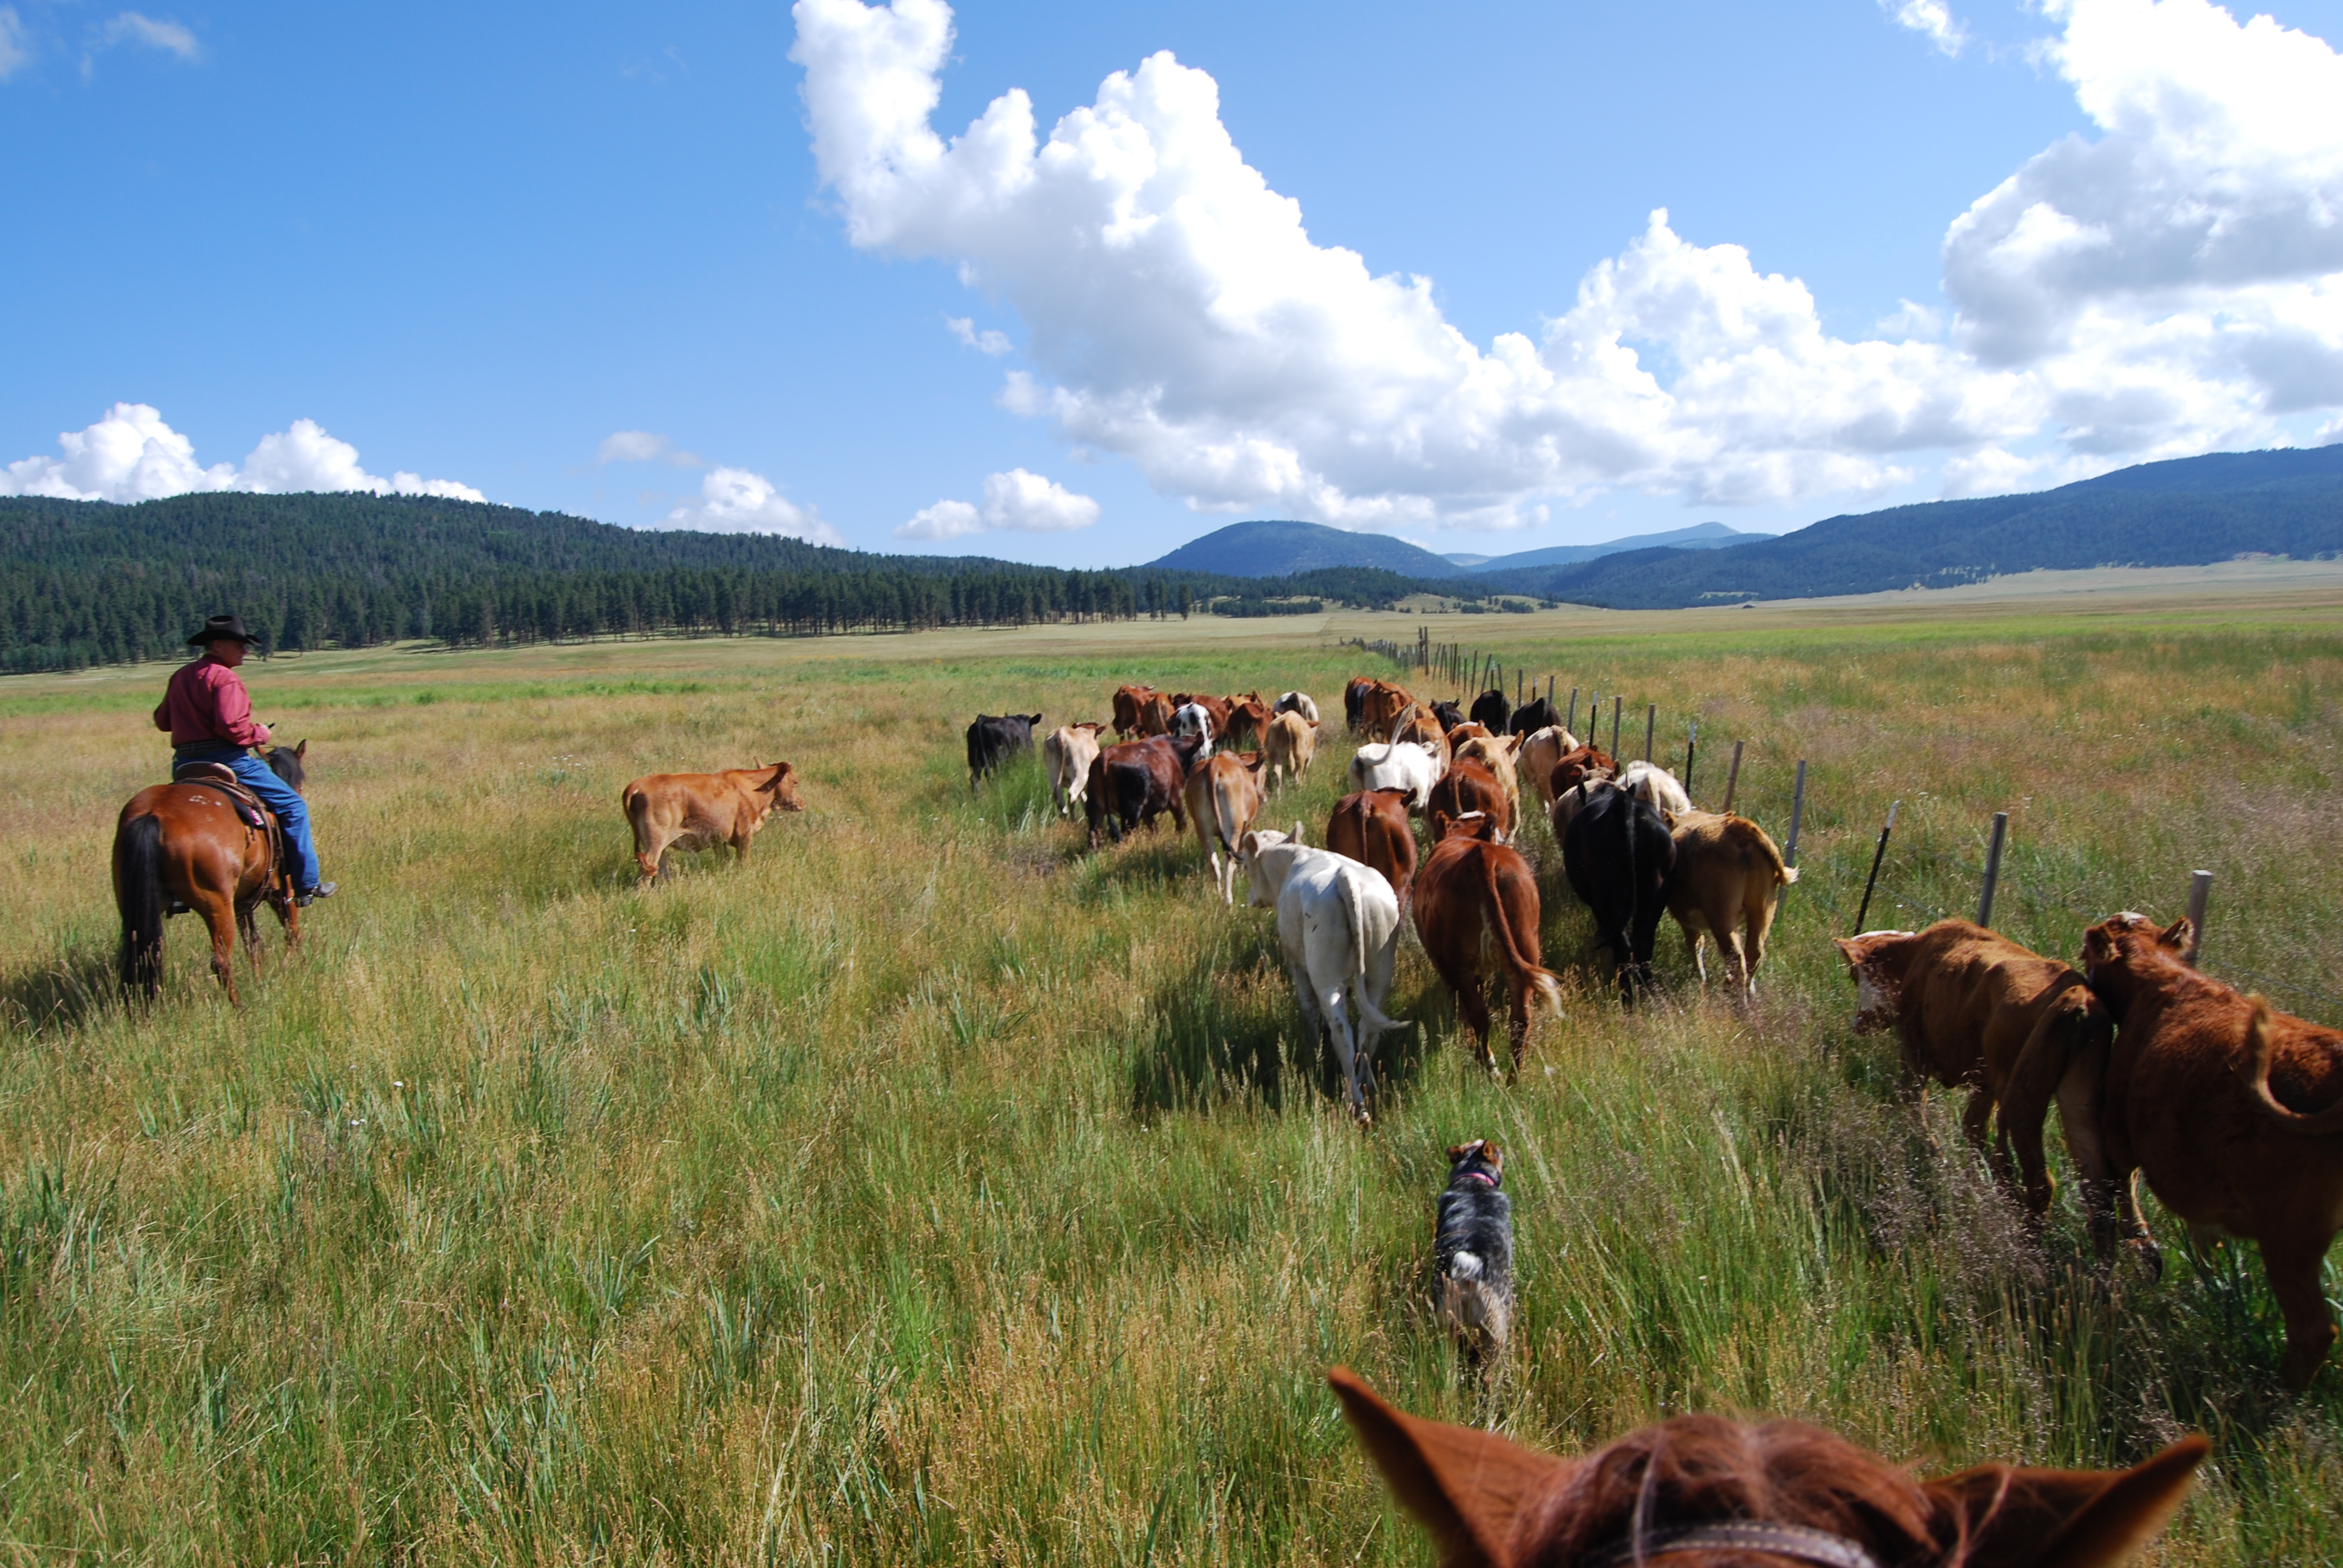 A range rider moves cattle along a fenceline within the Valles Caldera National Preserve.